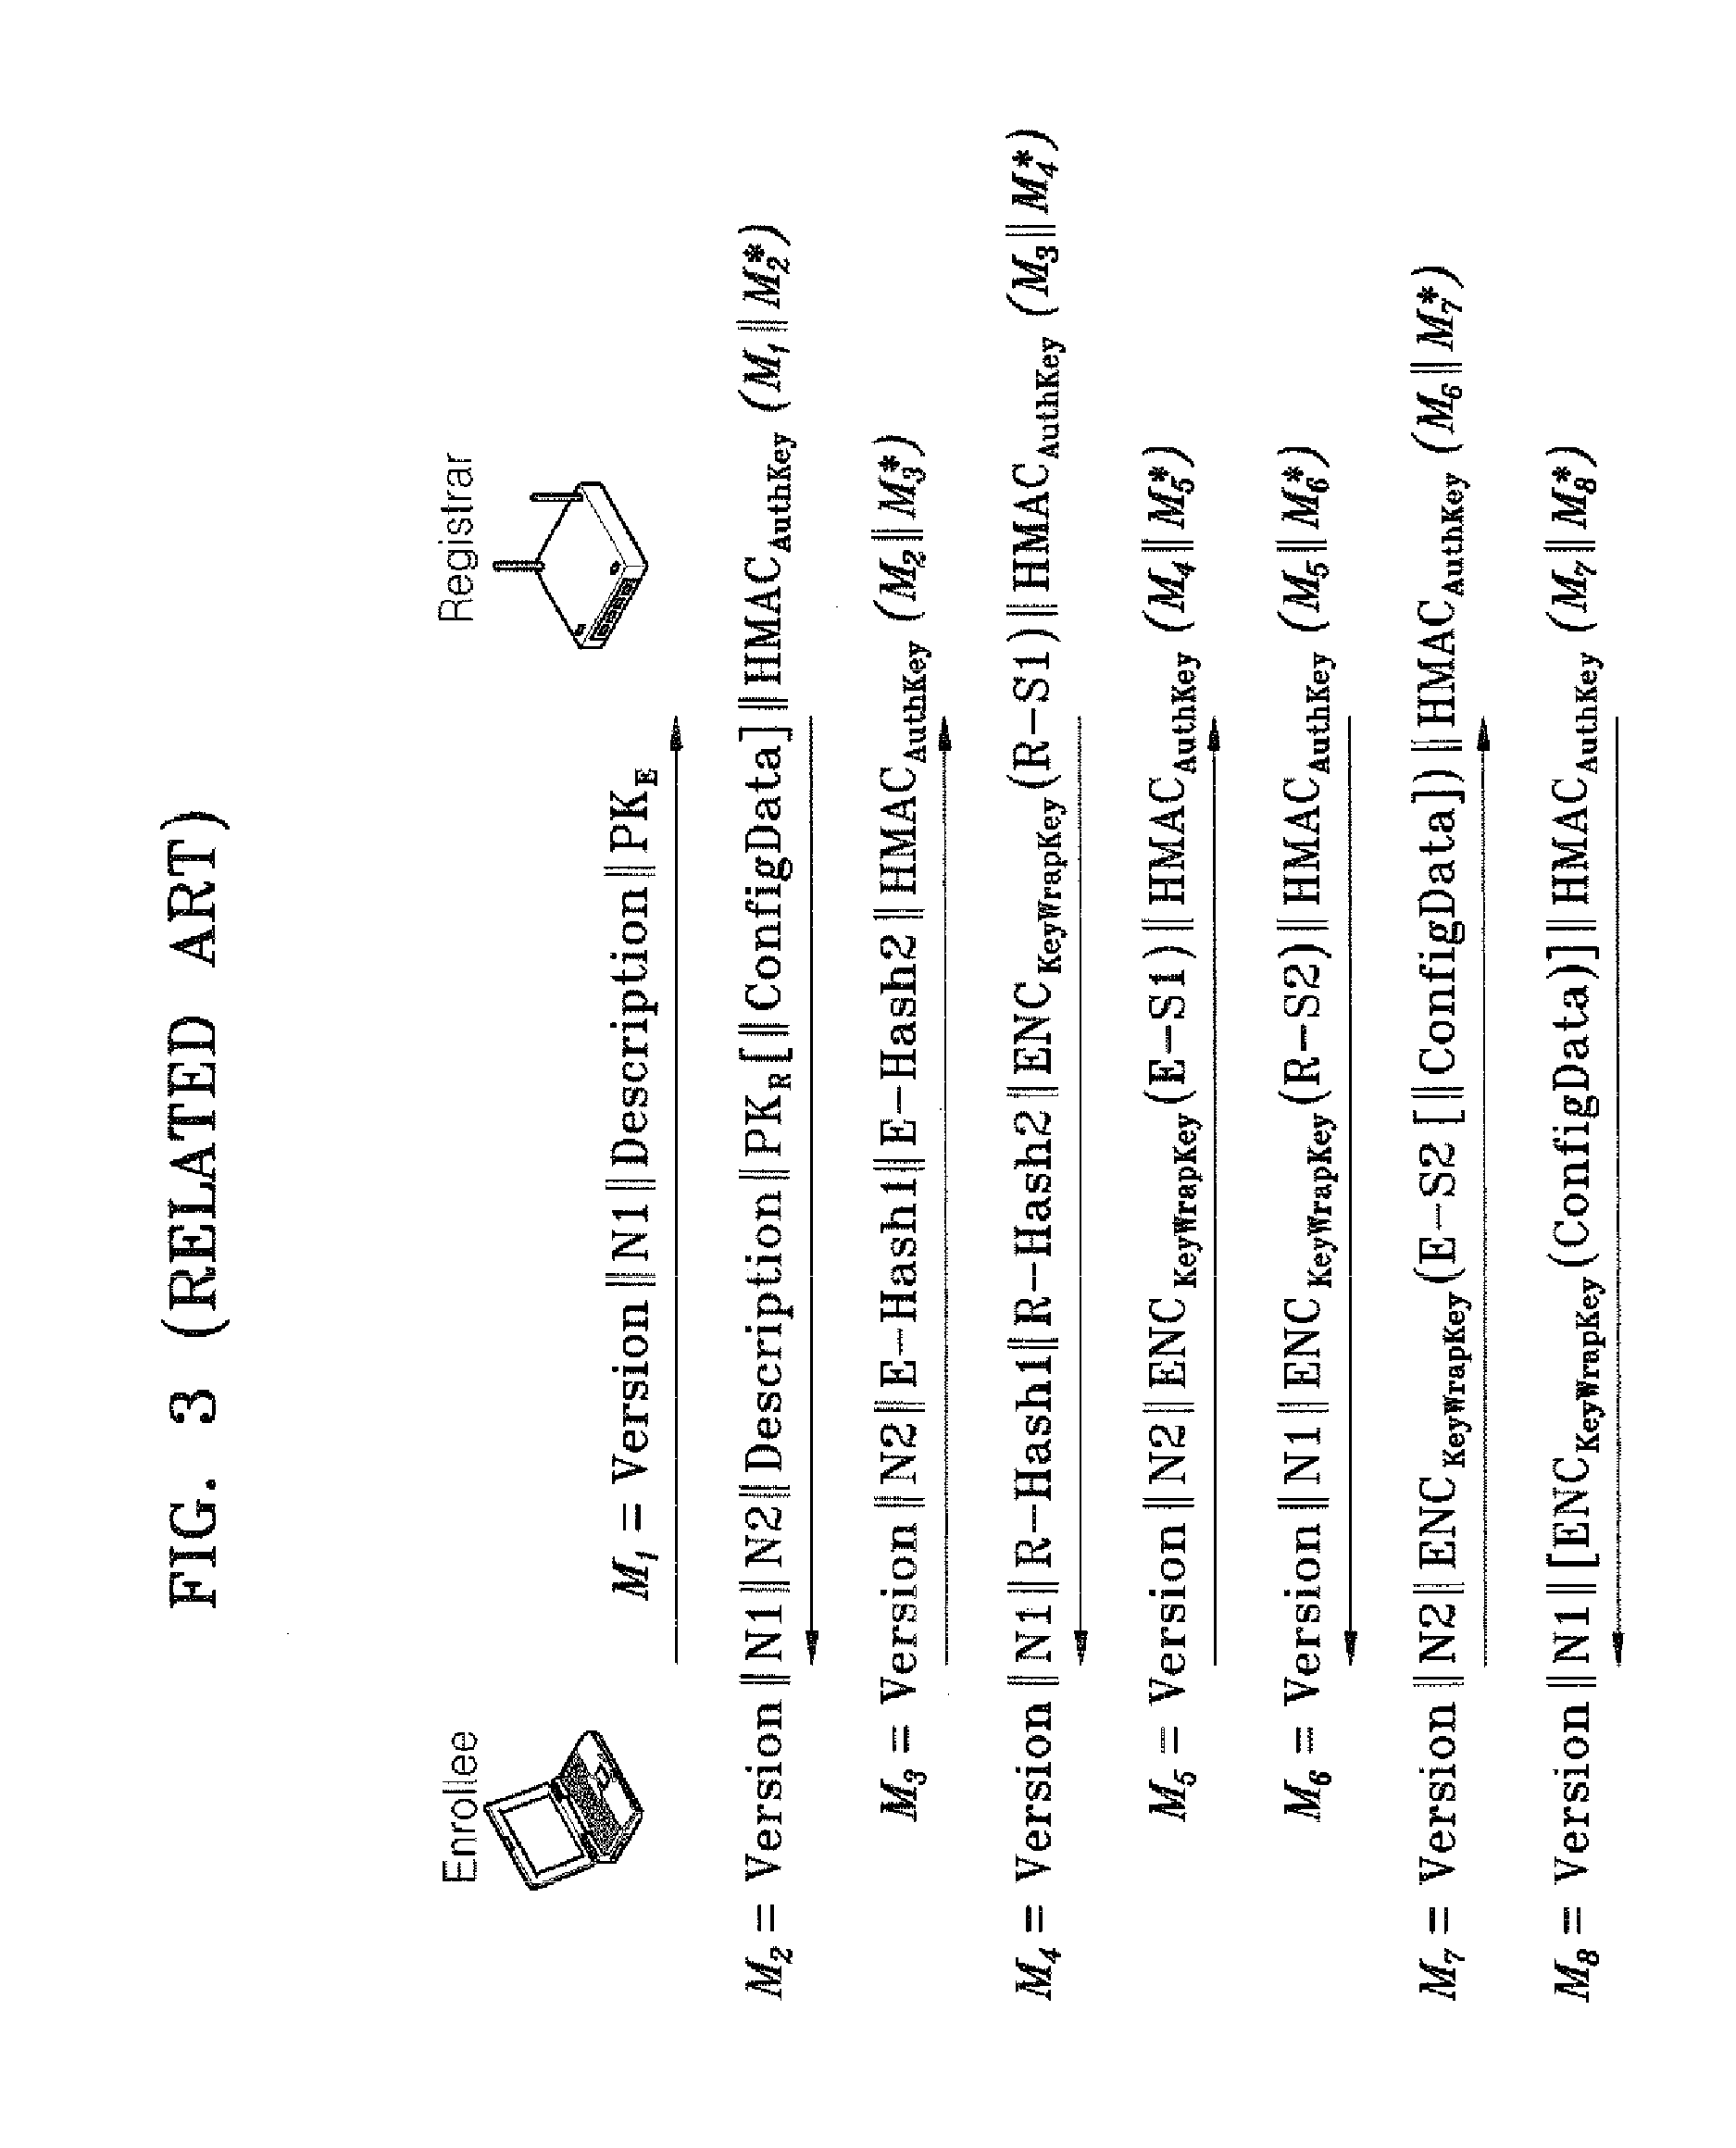 Apparatus and method for managing stations associated with wpa-psk wireless network